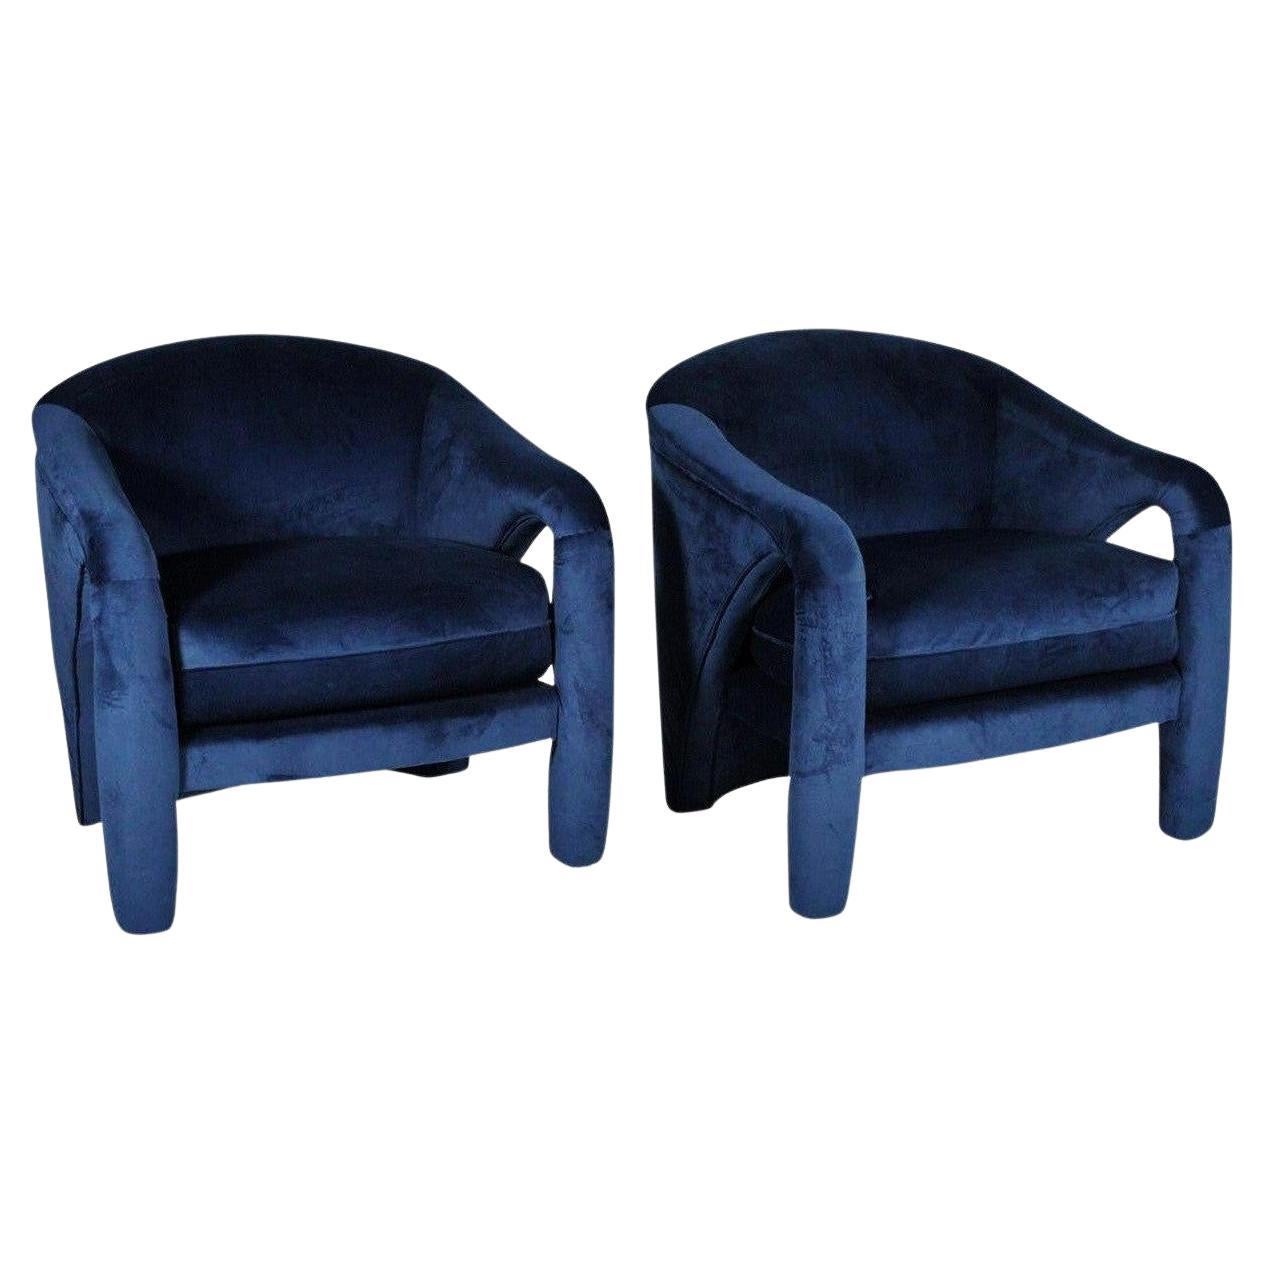 Vladimir Kaganesque Navy Blue Lounge Chairs by Weiman